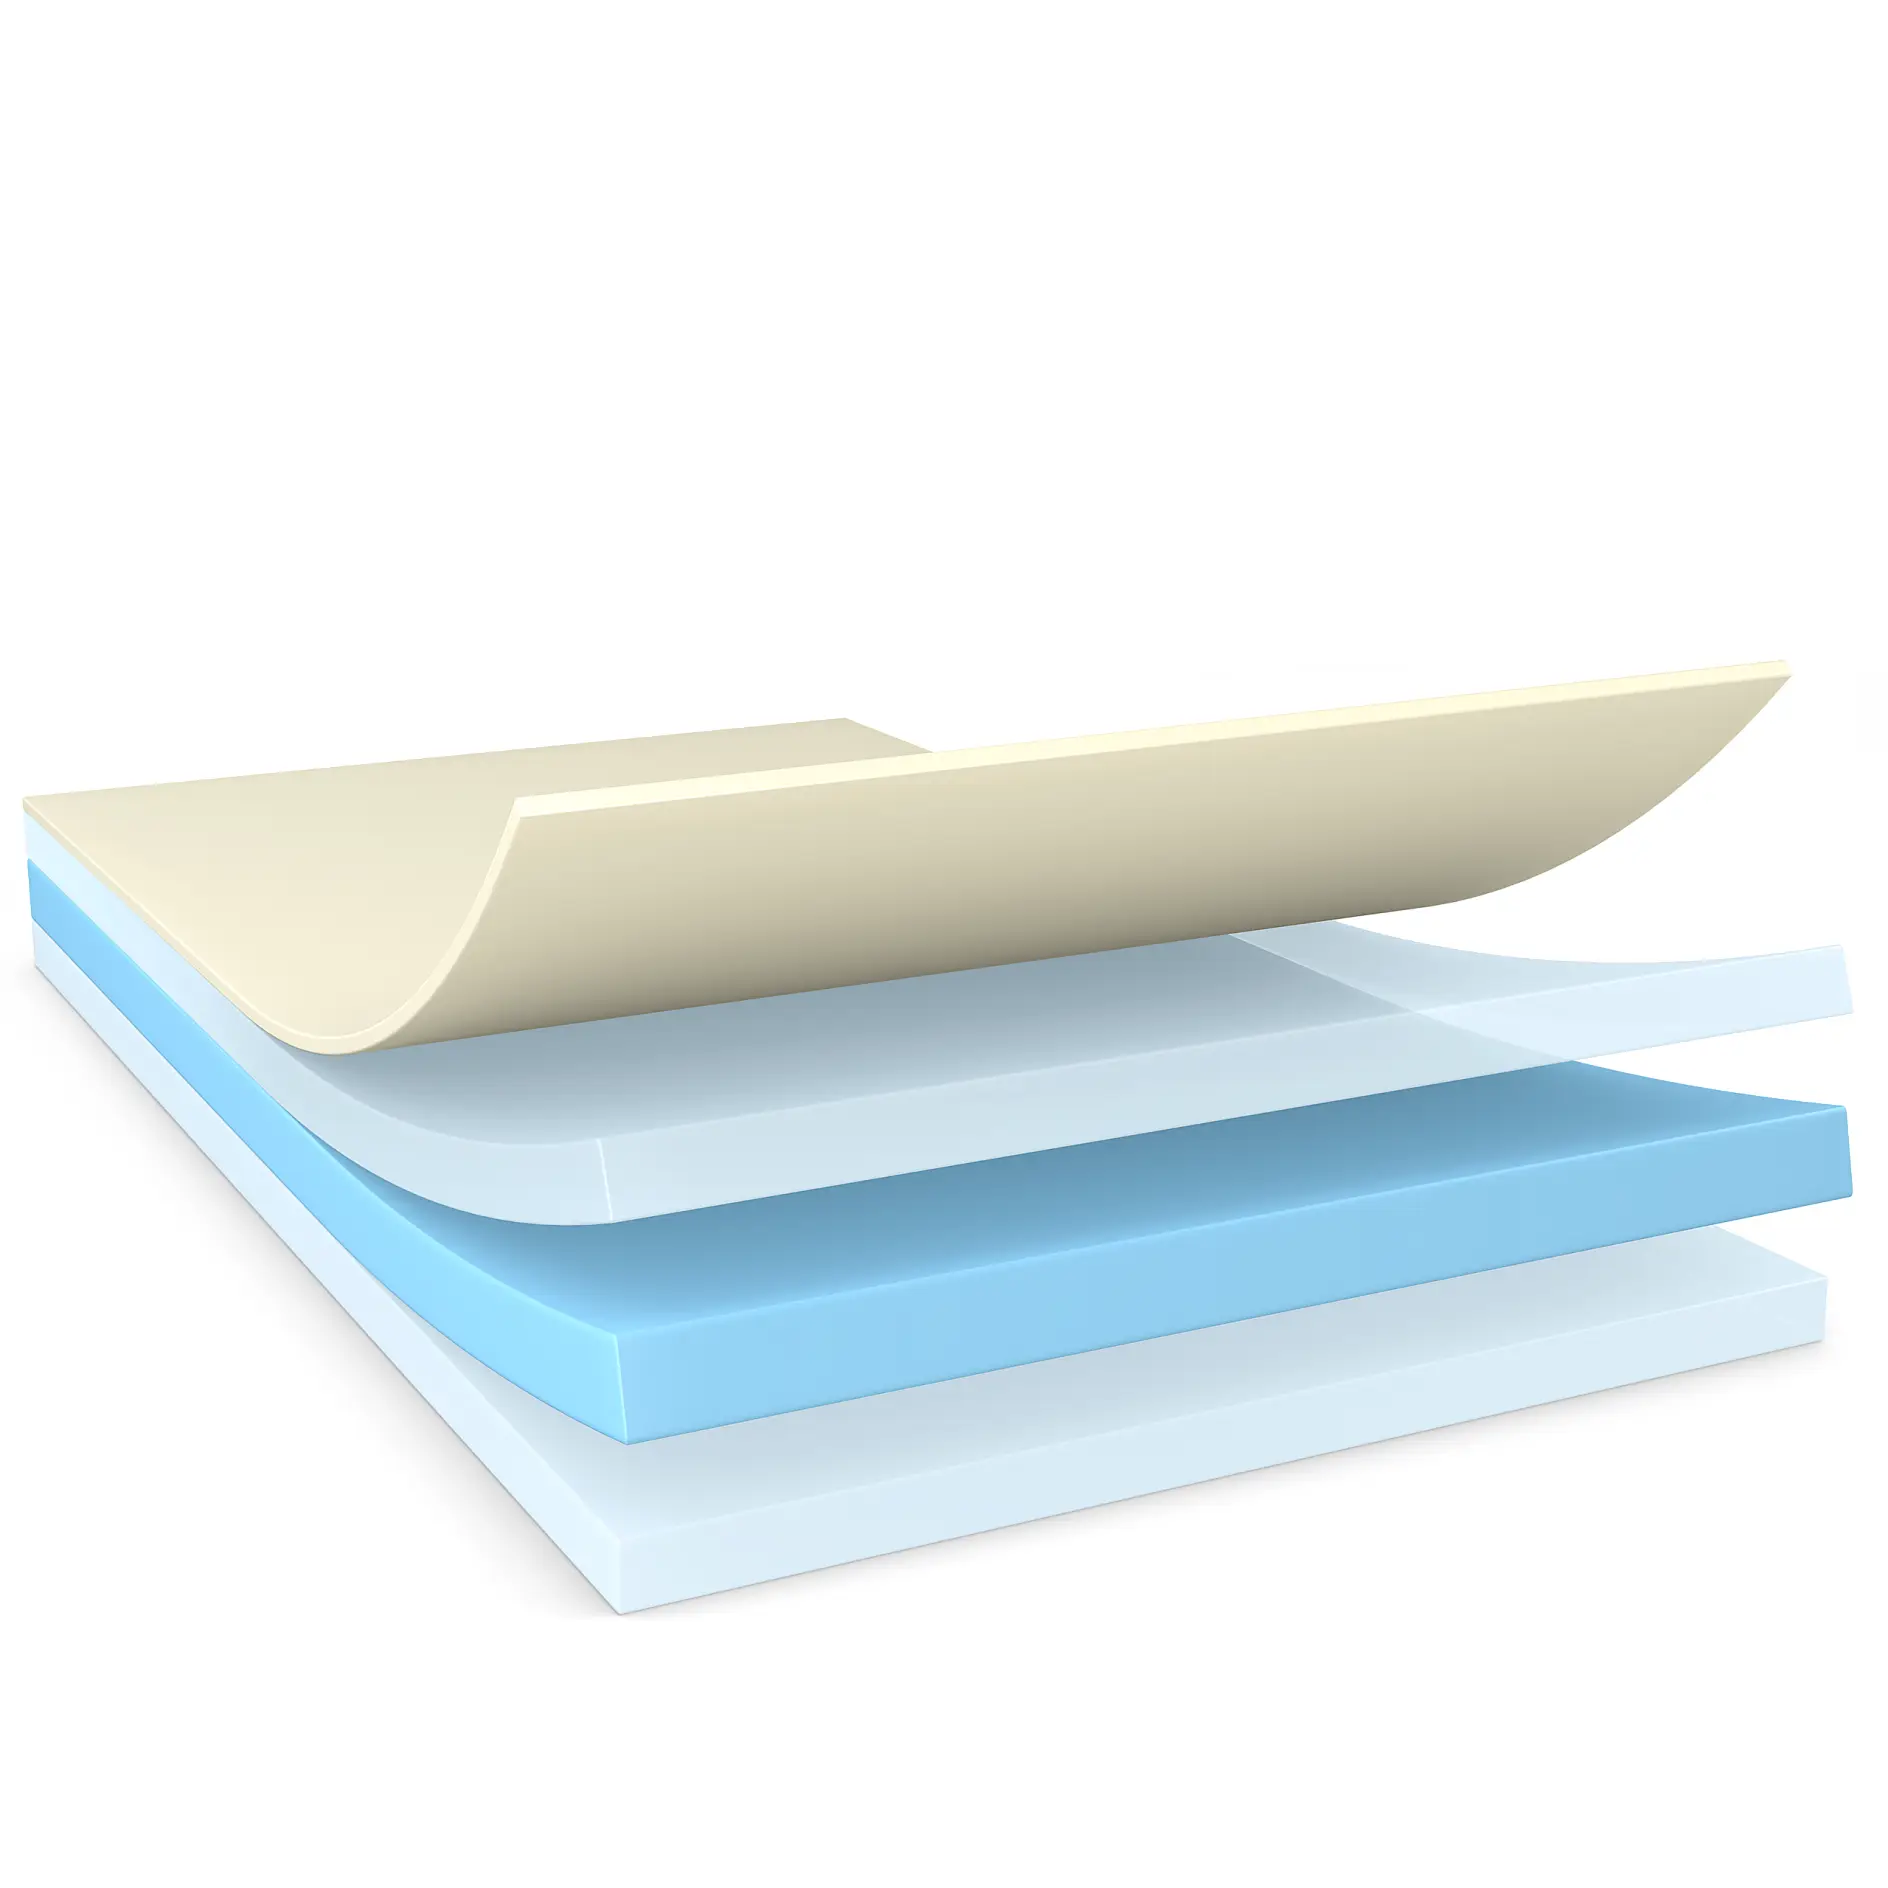 Product-Illustration_Double-Sided_Standard-Mounting_300dpi.png